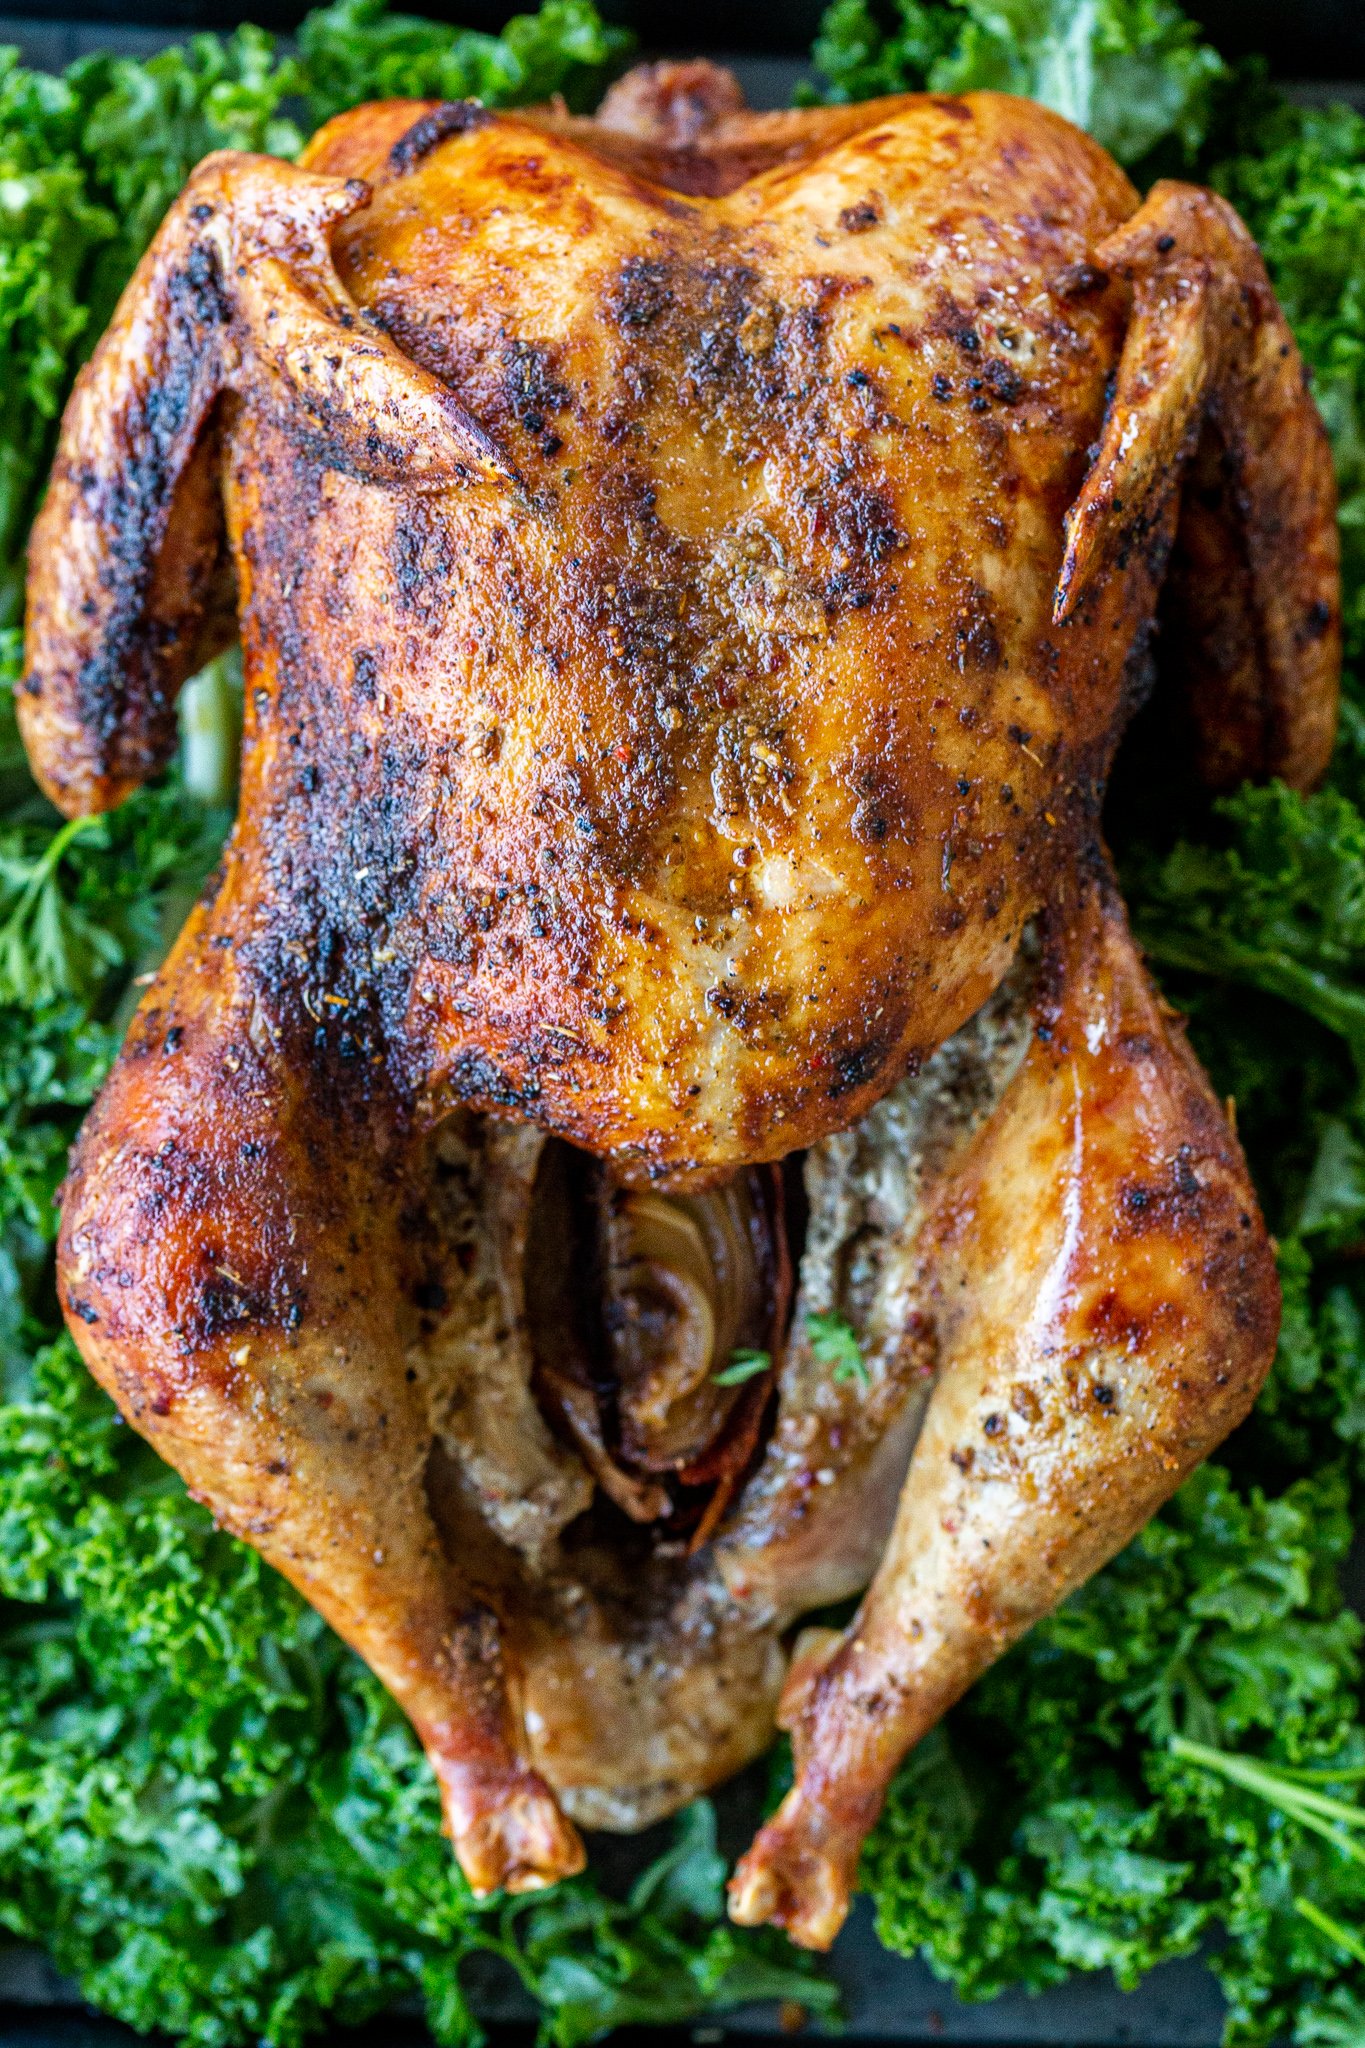 Oven Roasted Turkey Recipe [VIDEO] - Sweet and Savory Meals